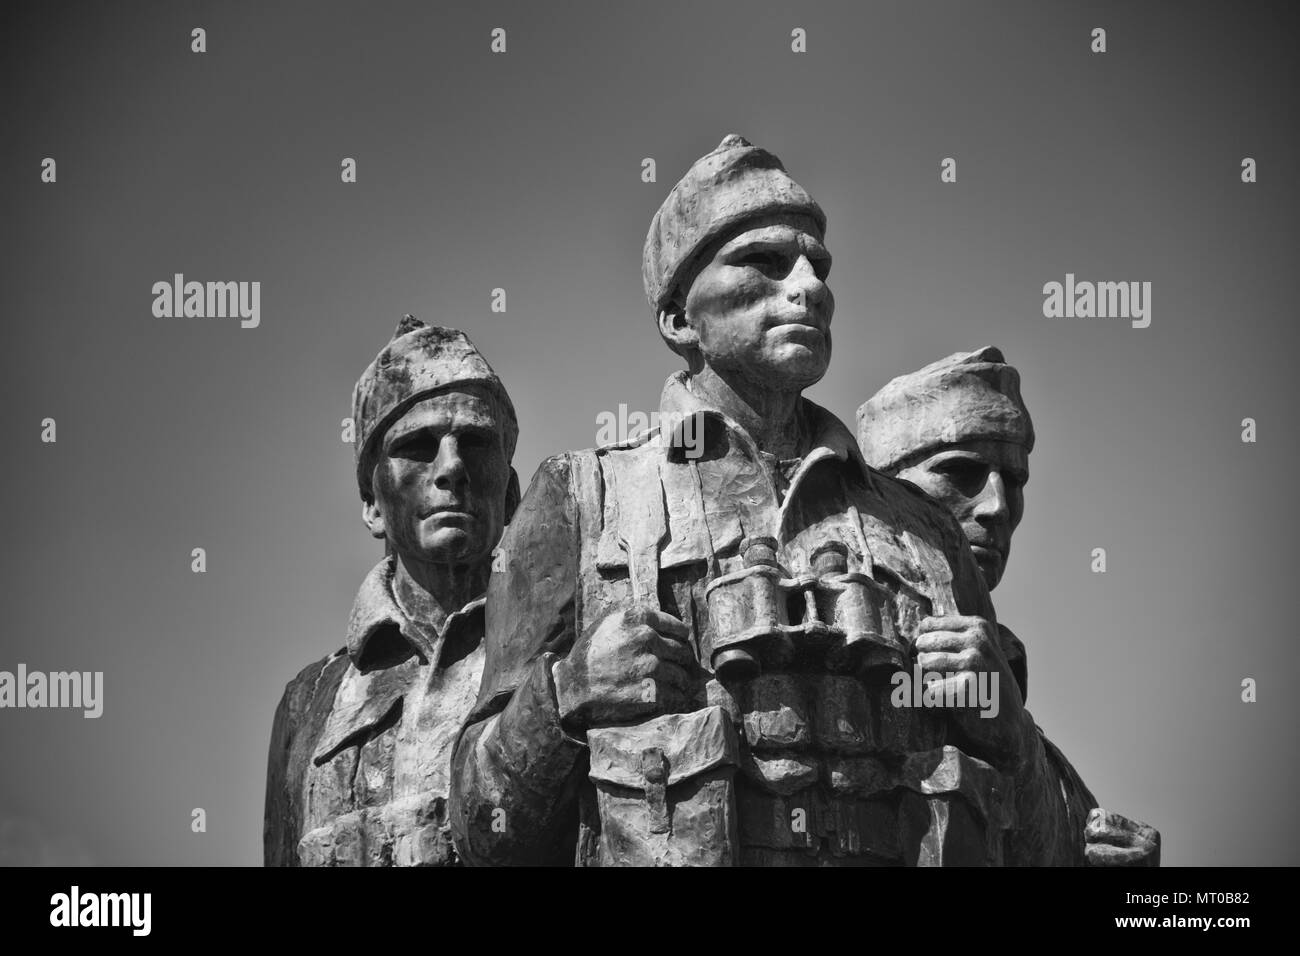 The Commando Memorial is a Category A listed monument in Lochaber, Scotland, dedicated to the men of the original British Commando Forces. Stock Photo